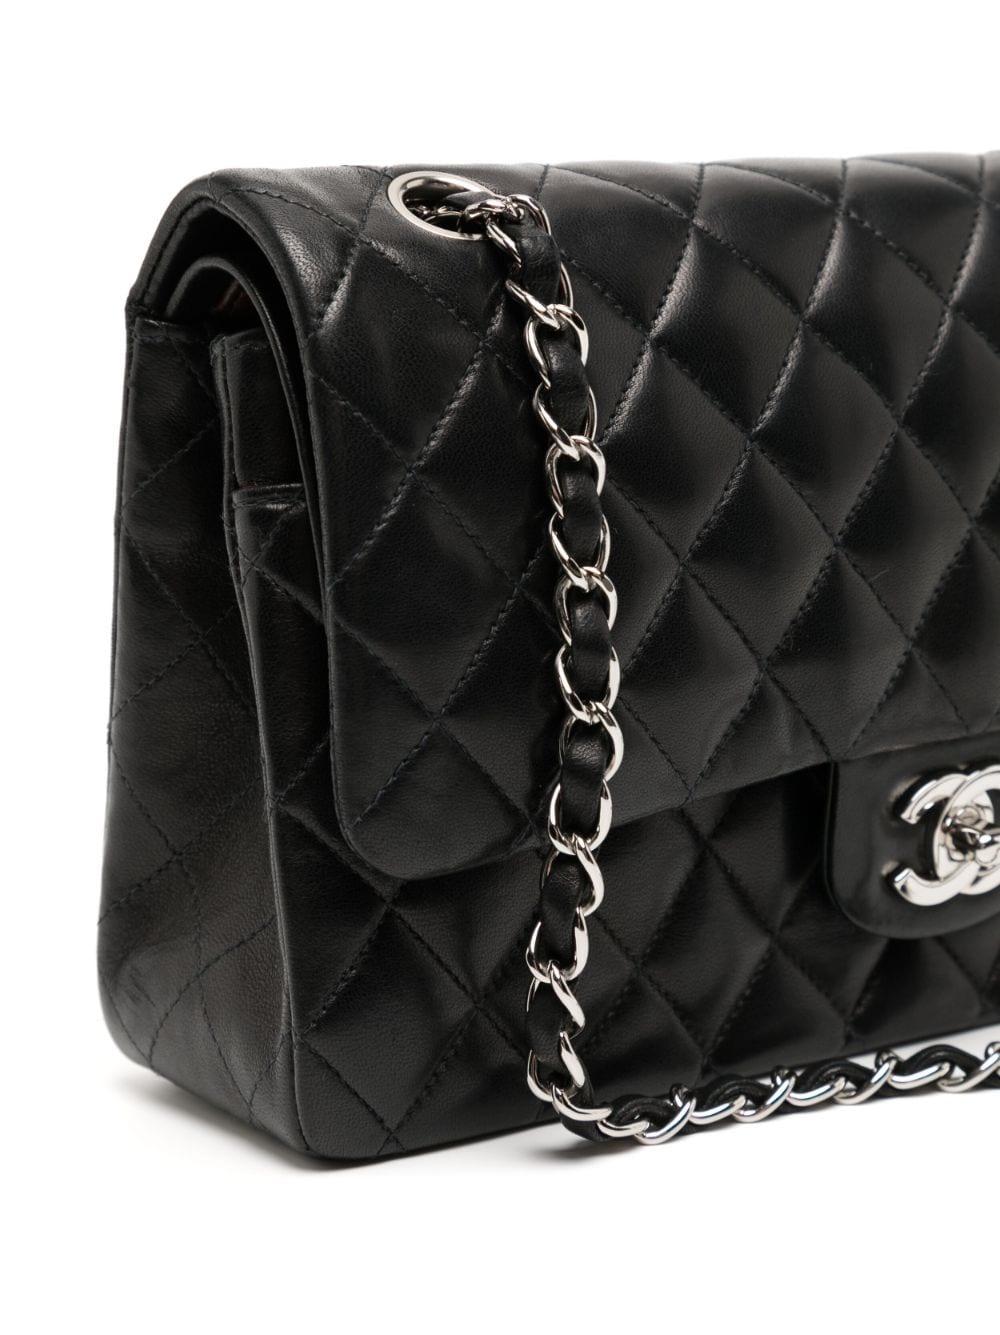 Chanel 2006 Vintage 2.55 Quilted Lambskin Medium Classic Double Flap Bag  3